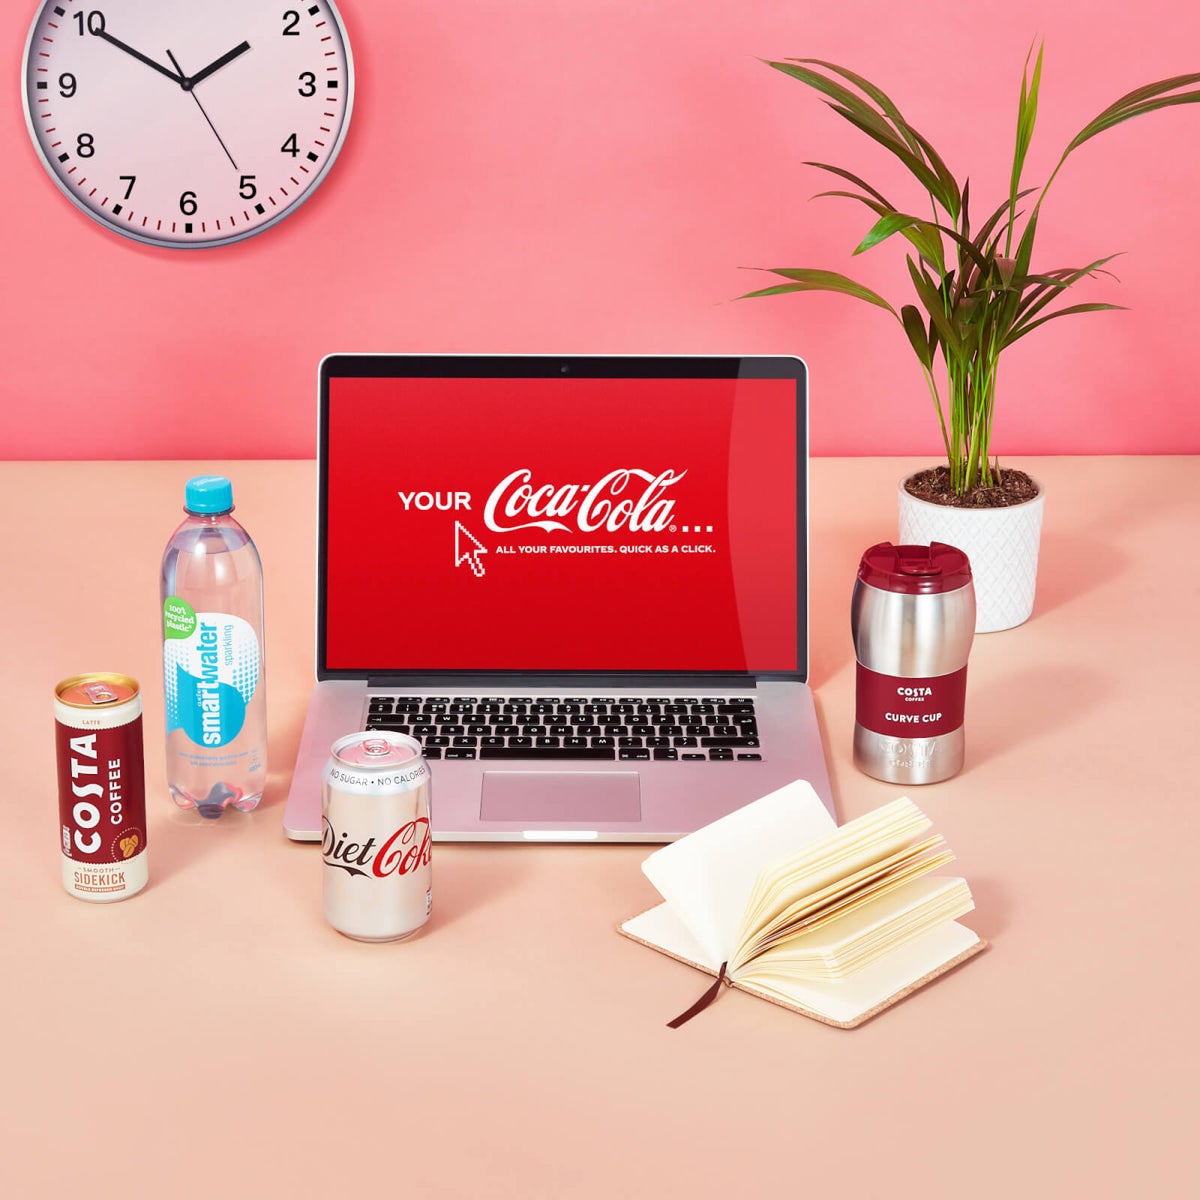 An open laptop with the Your Coca Cola logo on the screen and different Coca Cola drinks around it